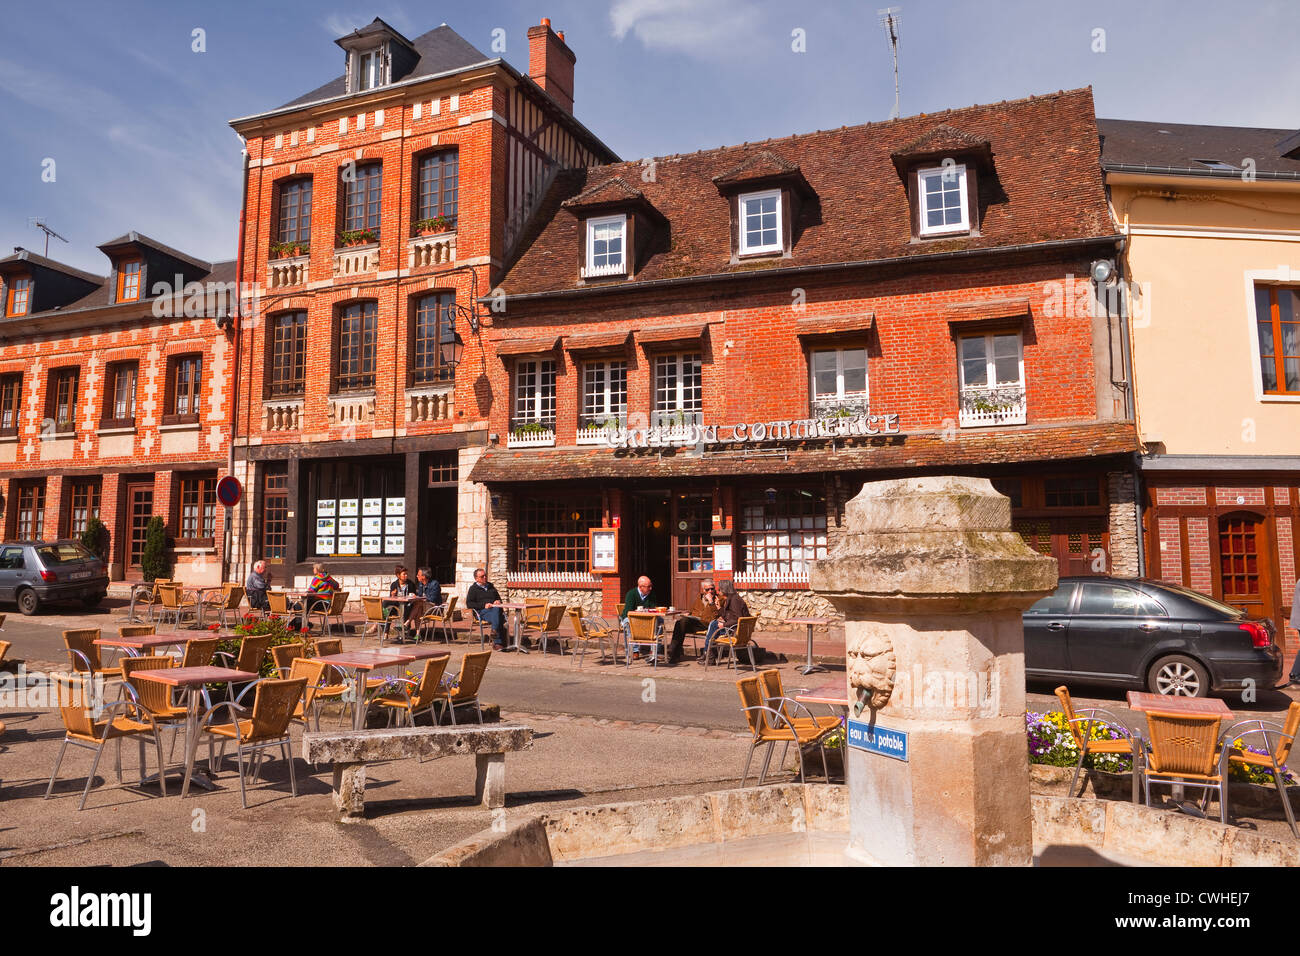 Looking across the main square in Lyons La Foret, France. Stock Photo